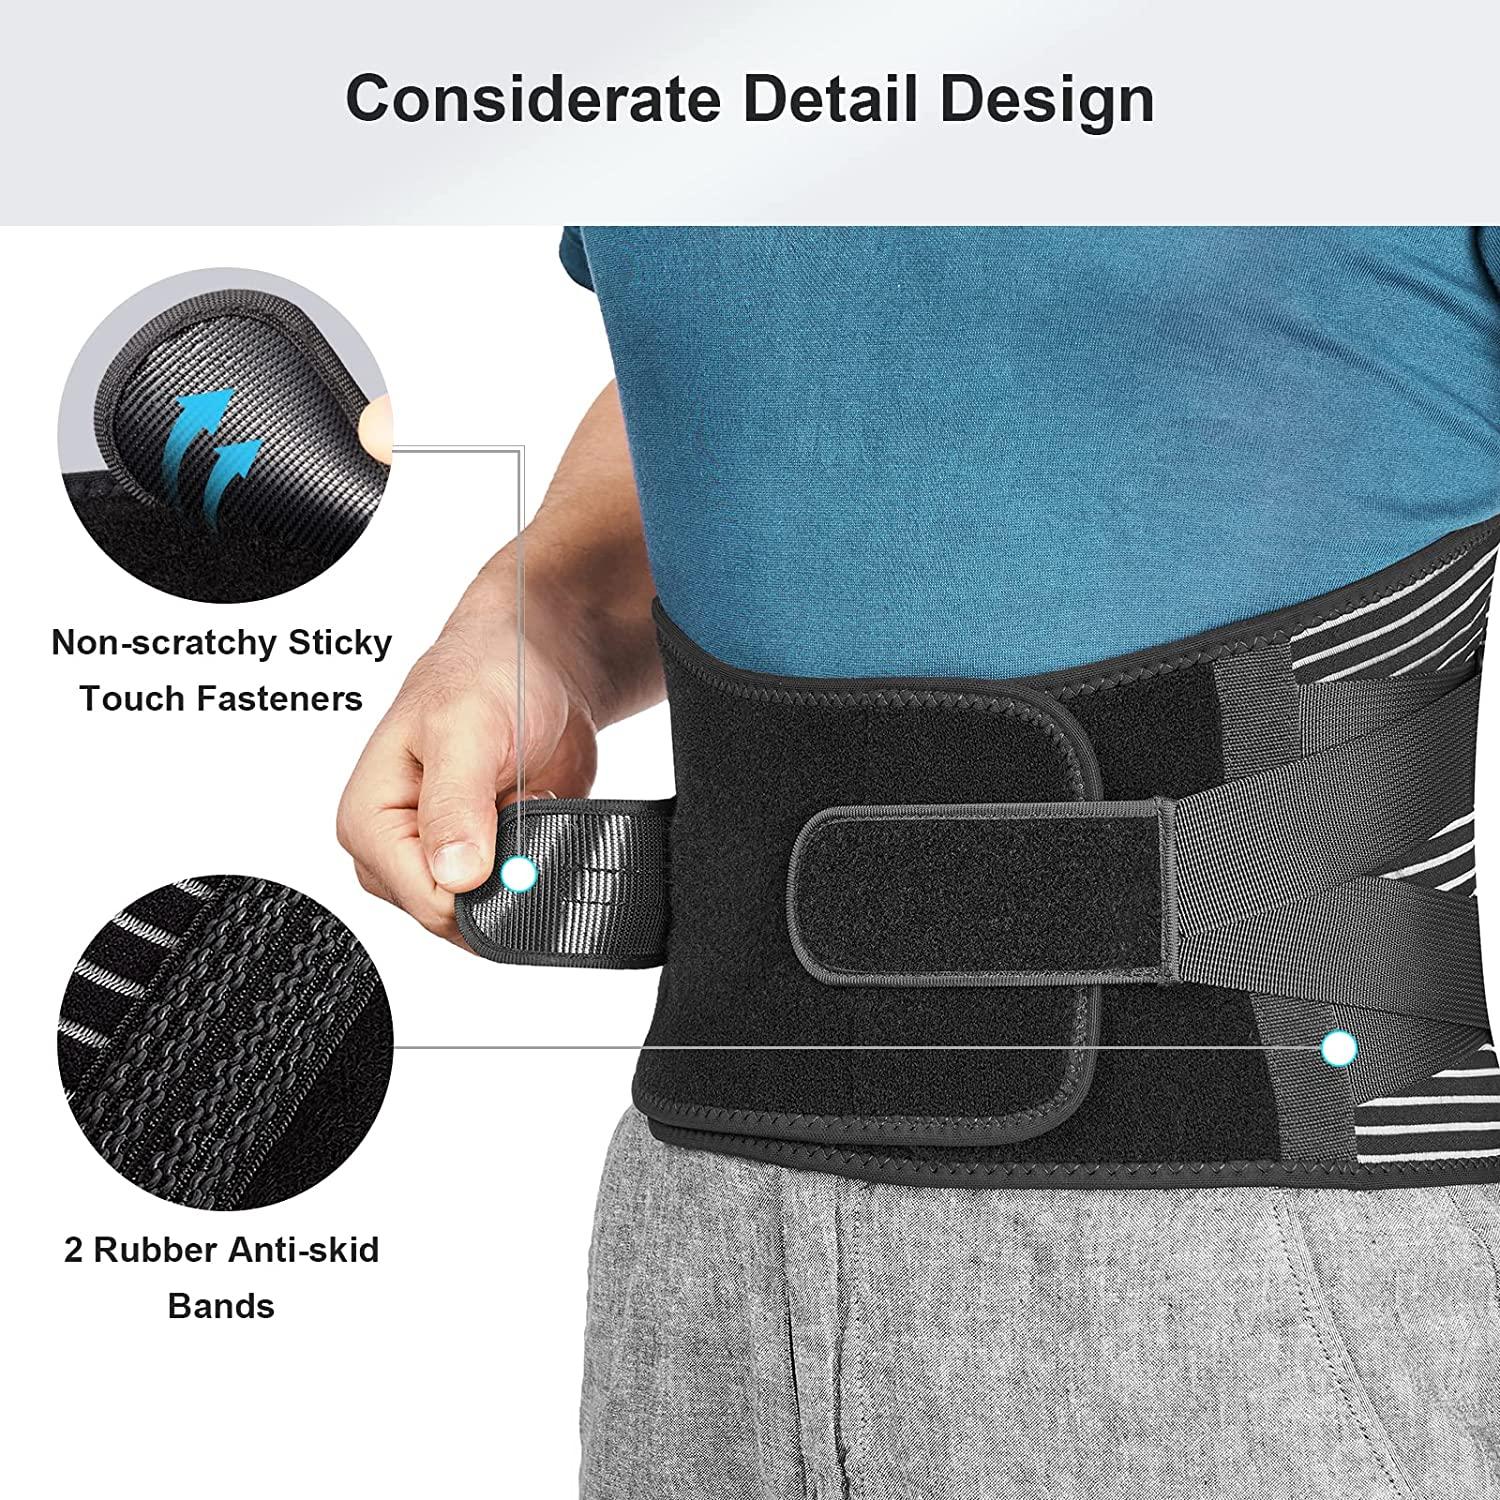 FREETOO Back Brace for Lower Back Pain Relief with 6 Stays